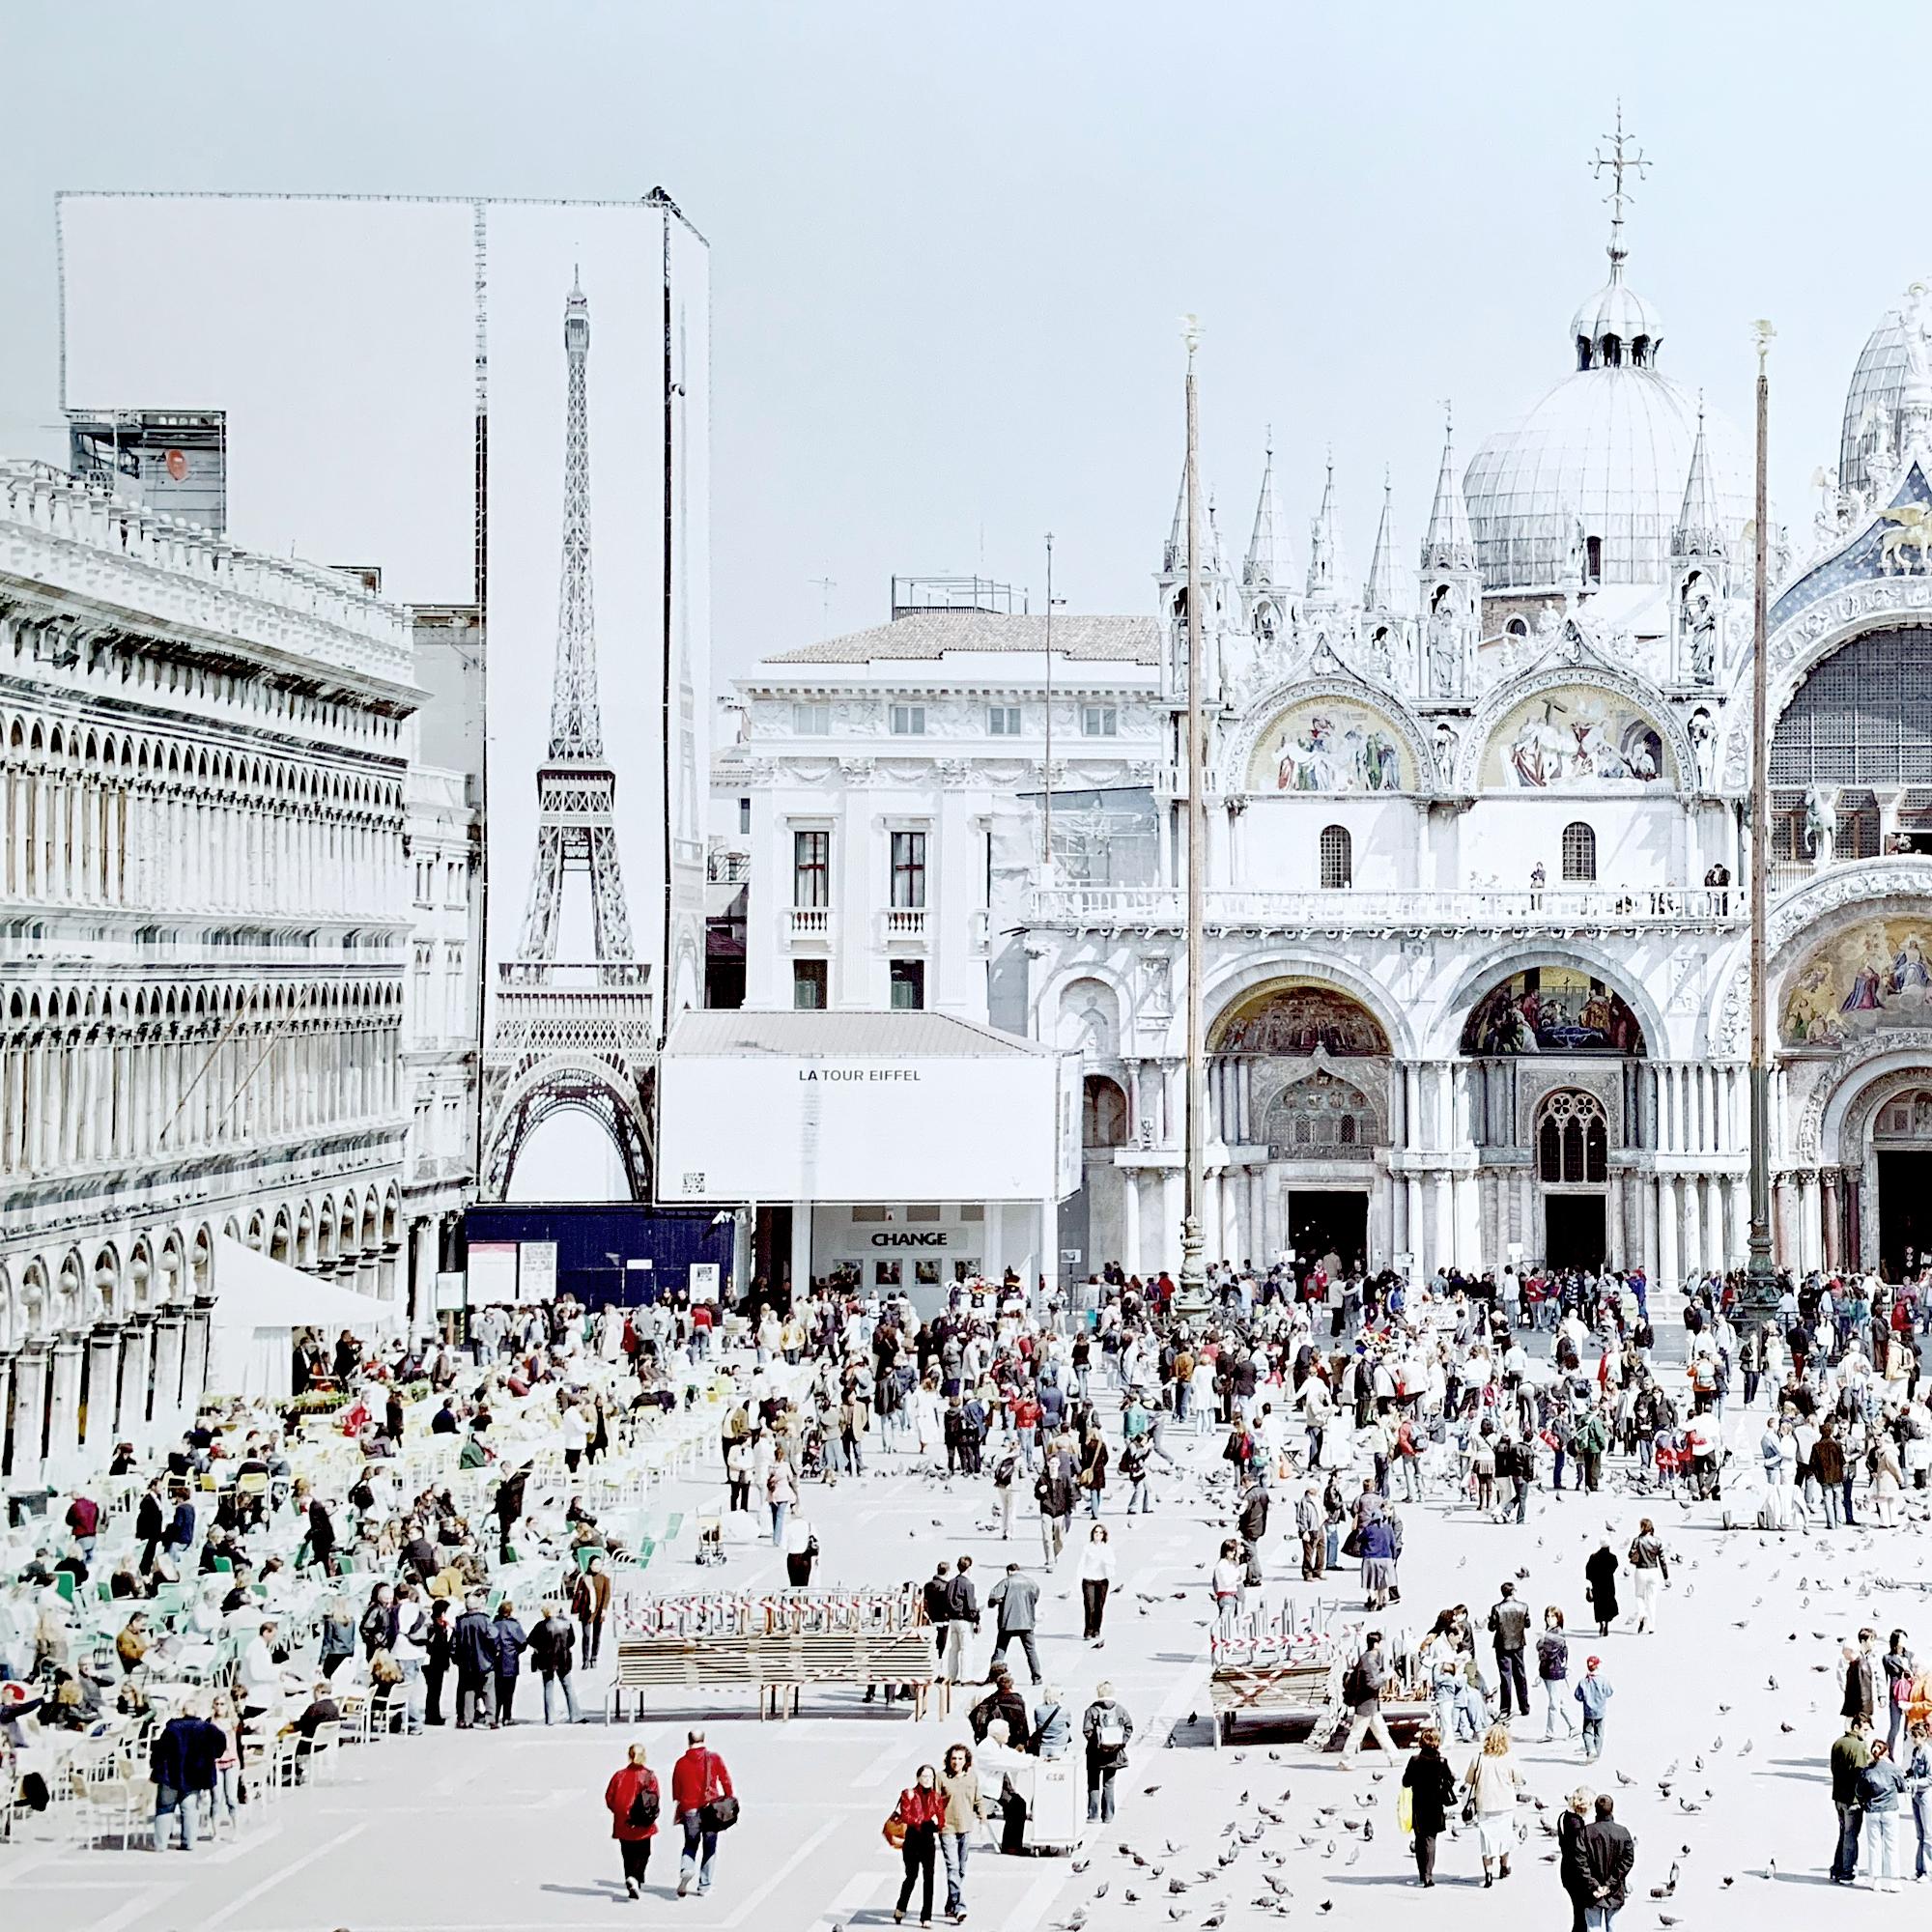 Massimo Vitali - Venezia San Marco
Offset Photolitograph (90x70 cm) from A Portfolio of Landscapes and Figures printed on Royal Consort Paper by Steidl Verlag for Brancolini Grimaldi, Florence, 2006
Limited Edition : No. 74 (120 copies), numbered